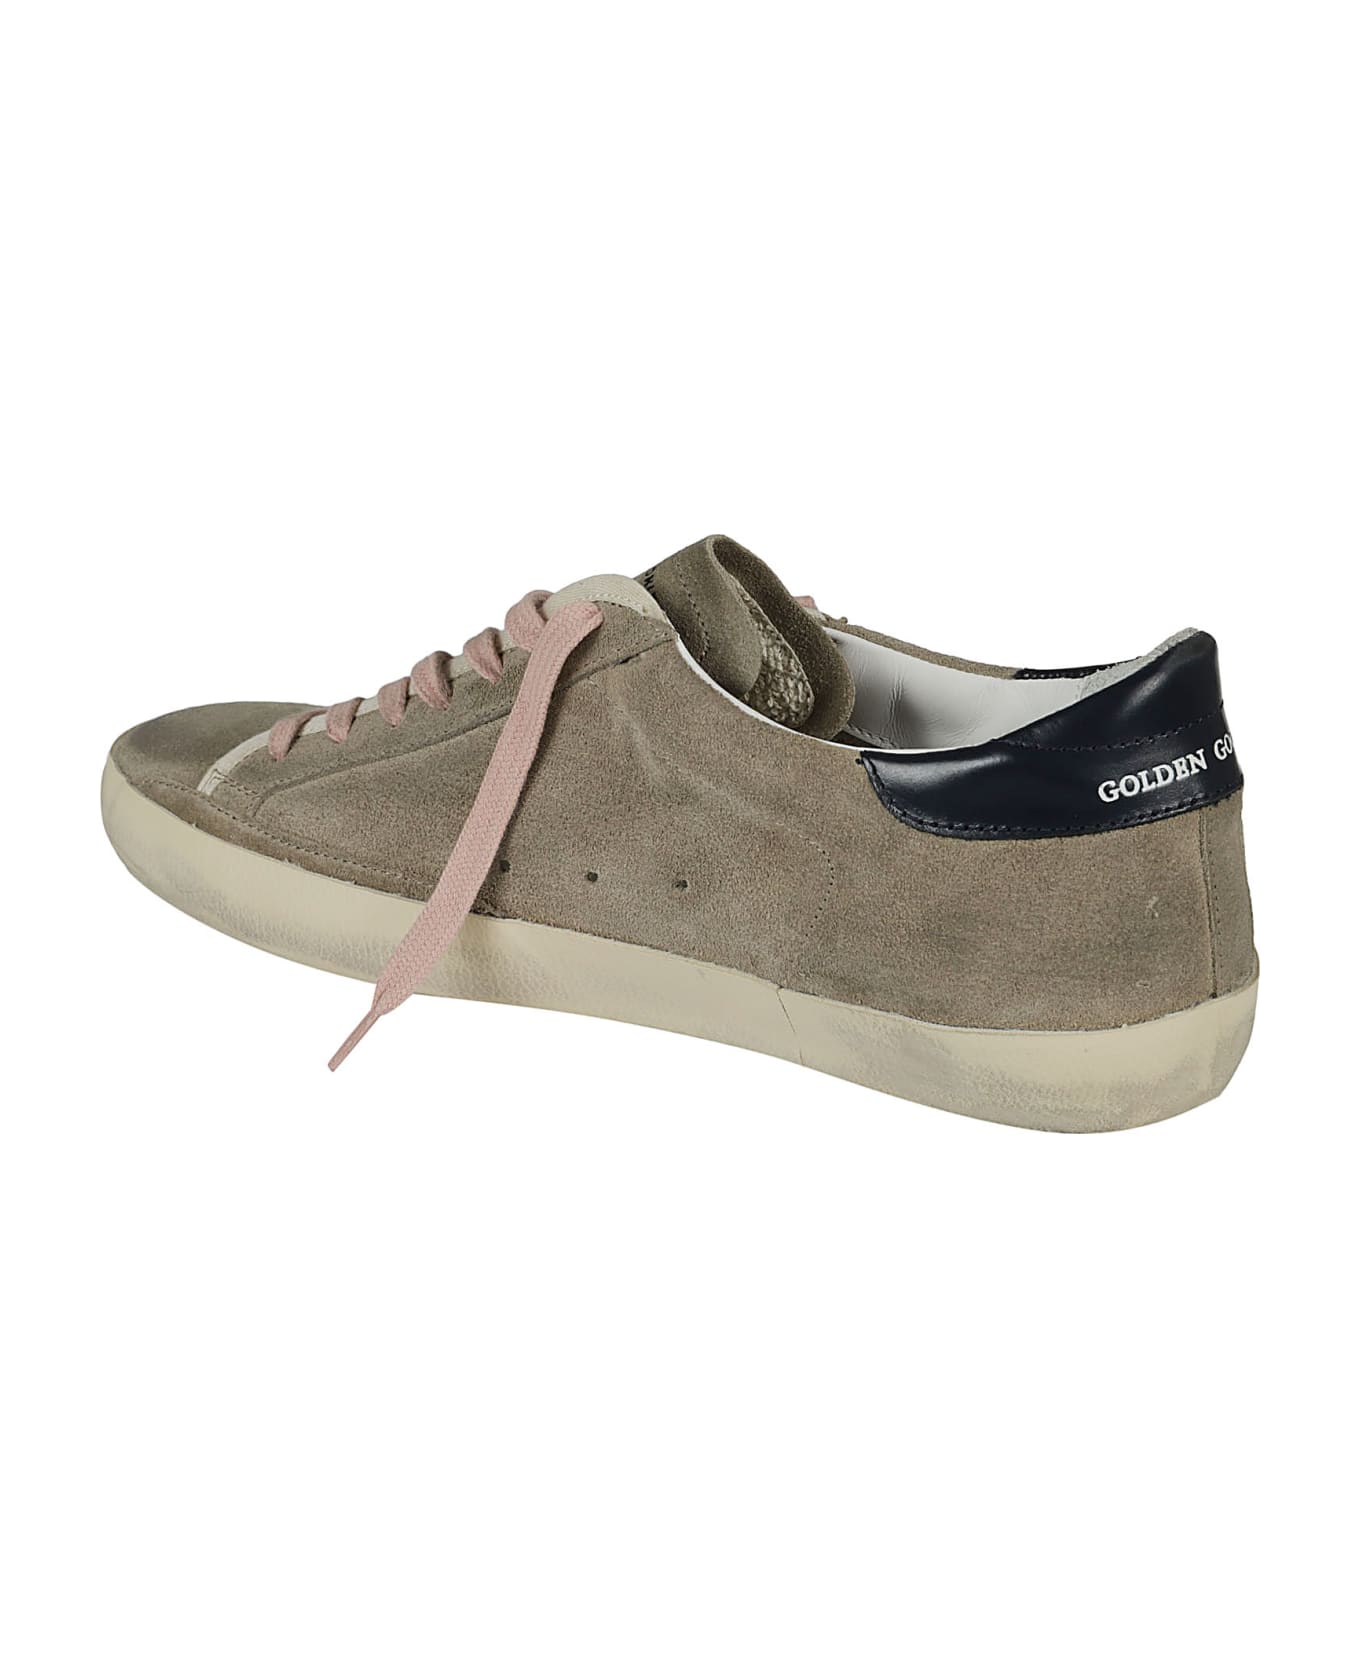 Golden Goose Silver-star Classic Sneakers - Taupe/Silver